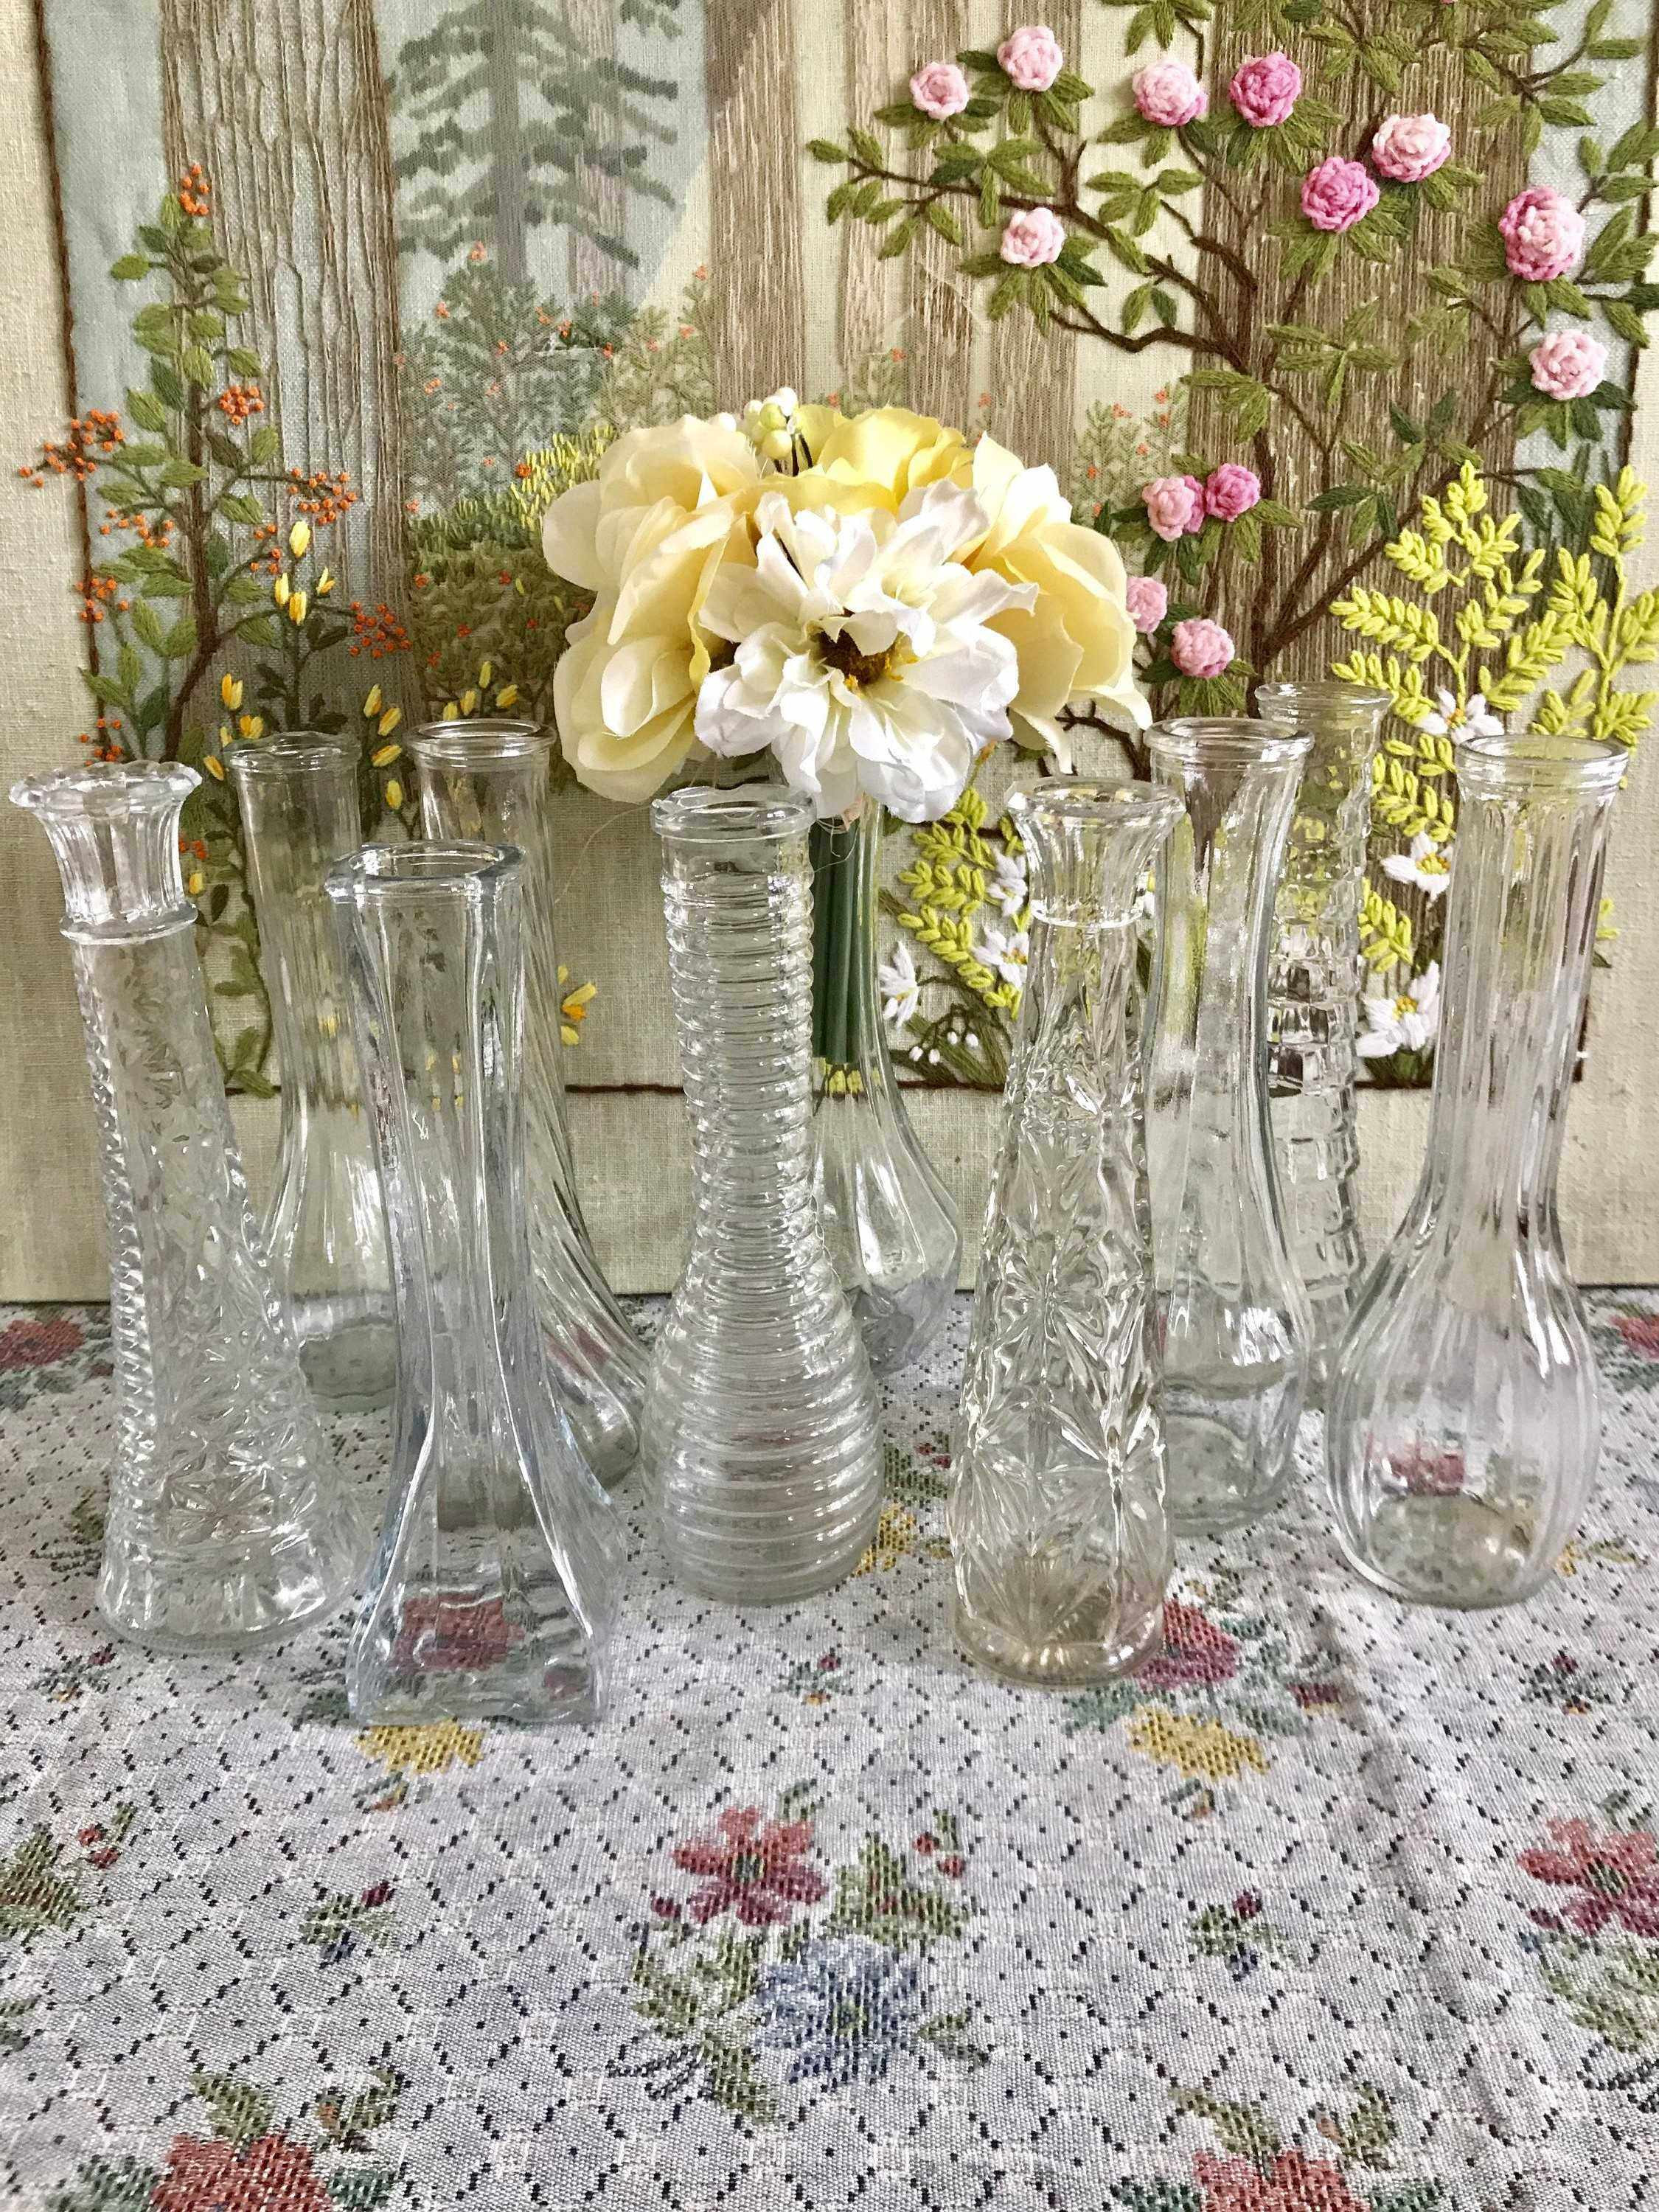 29 Popular Inexpensive Silver Vases 2024 free download inexpensive silver vases of cheap wedding decorations for tables awesome living room vases with regard to cheap wedding decorations for tables awesome living room vases wedding inspirational